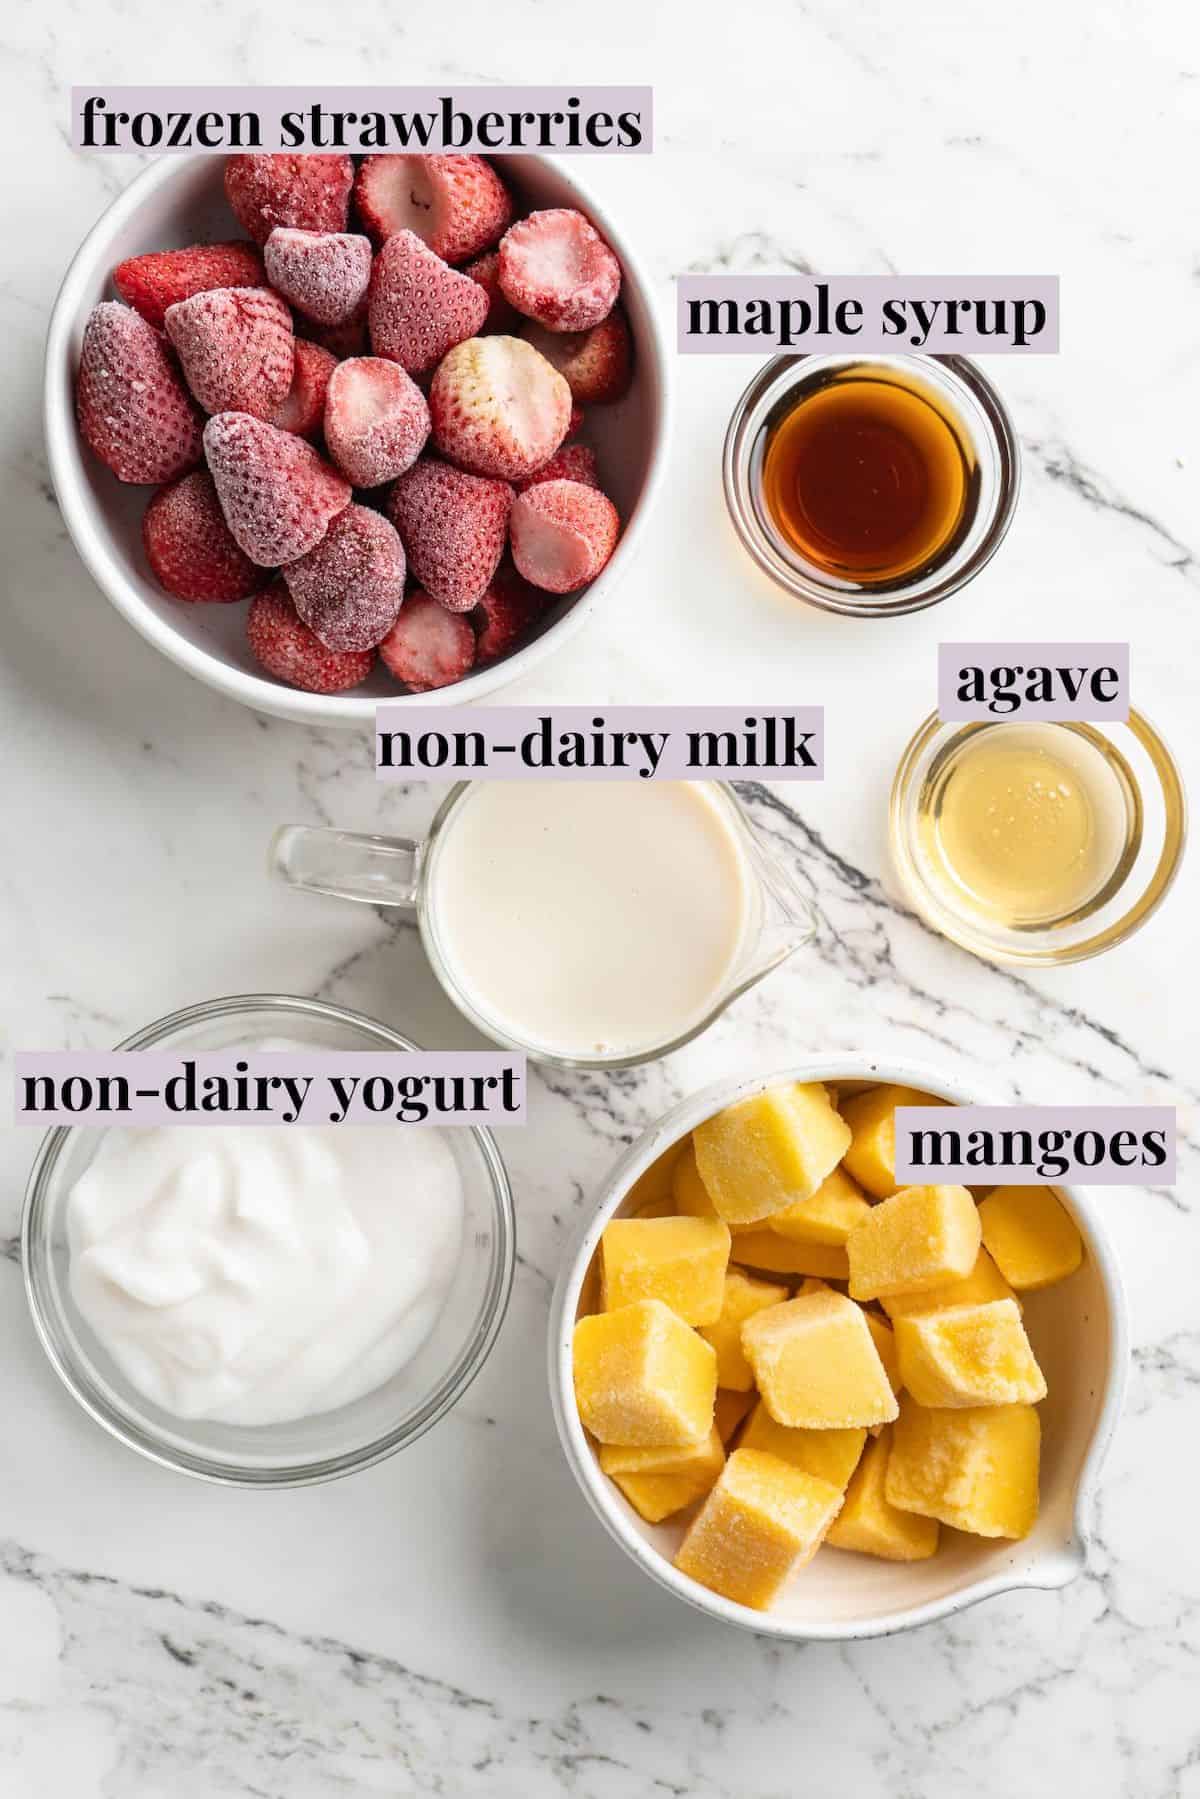 Overhead view of ingredients for strawberry mango smoothie with labels